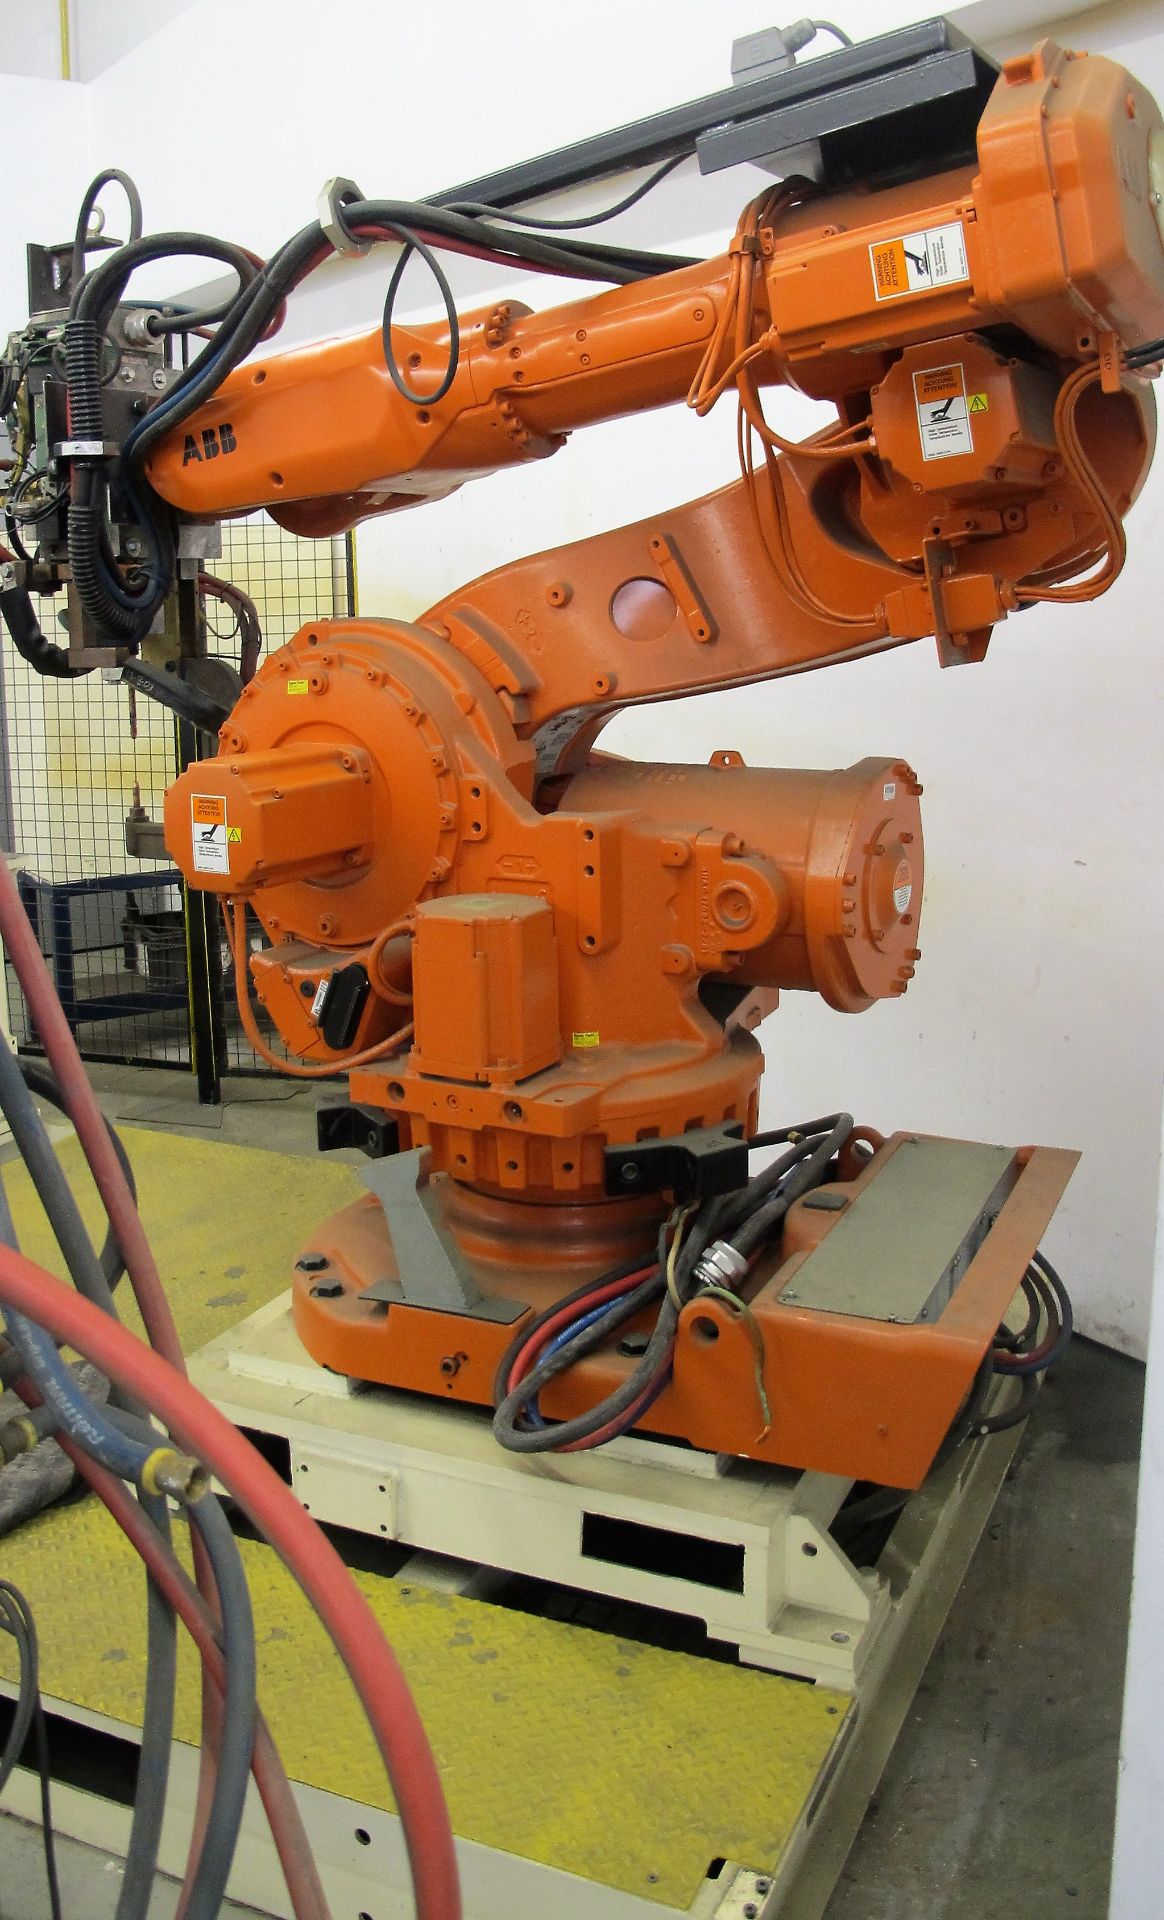 ROBOTIC WELDING CELL CONSISTING OF: ABB IRB 6600 M2004 6-AXIS ROBOT (REFURBISHED IN 2014), S/N 66- - Image 5 of 22